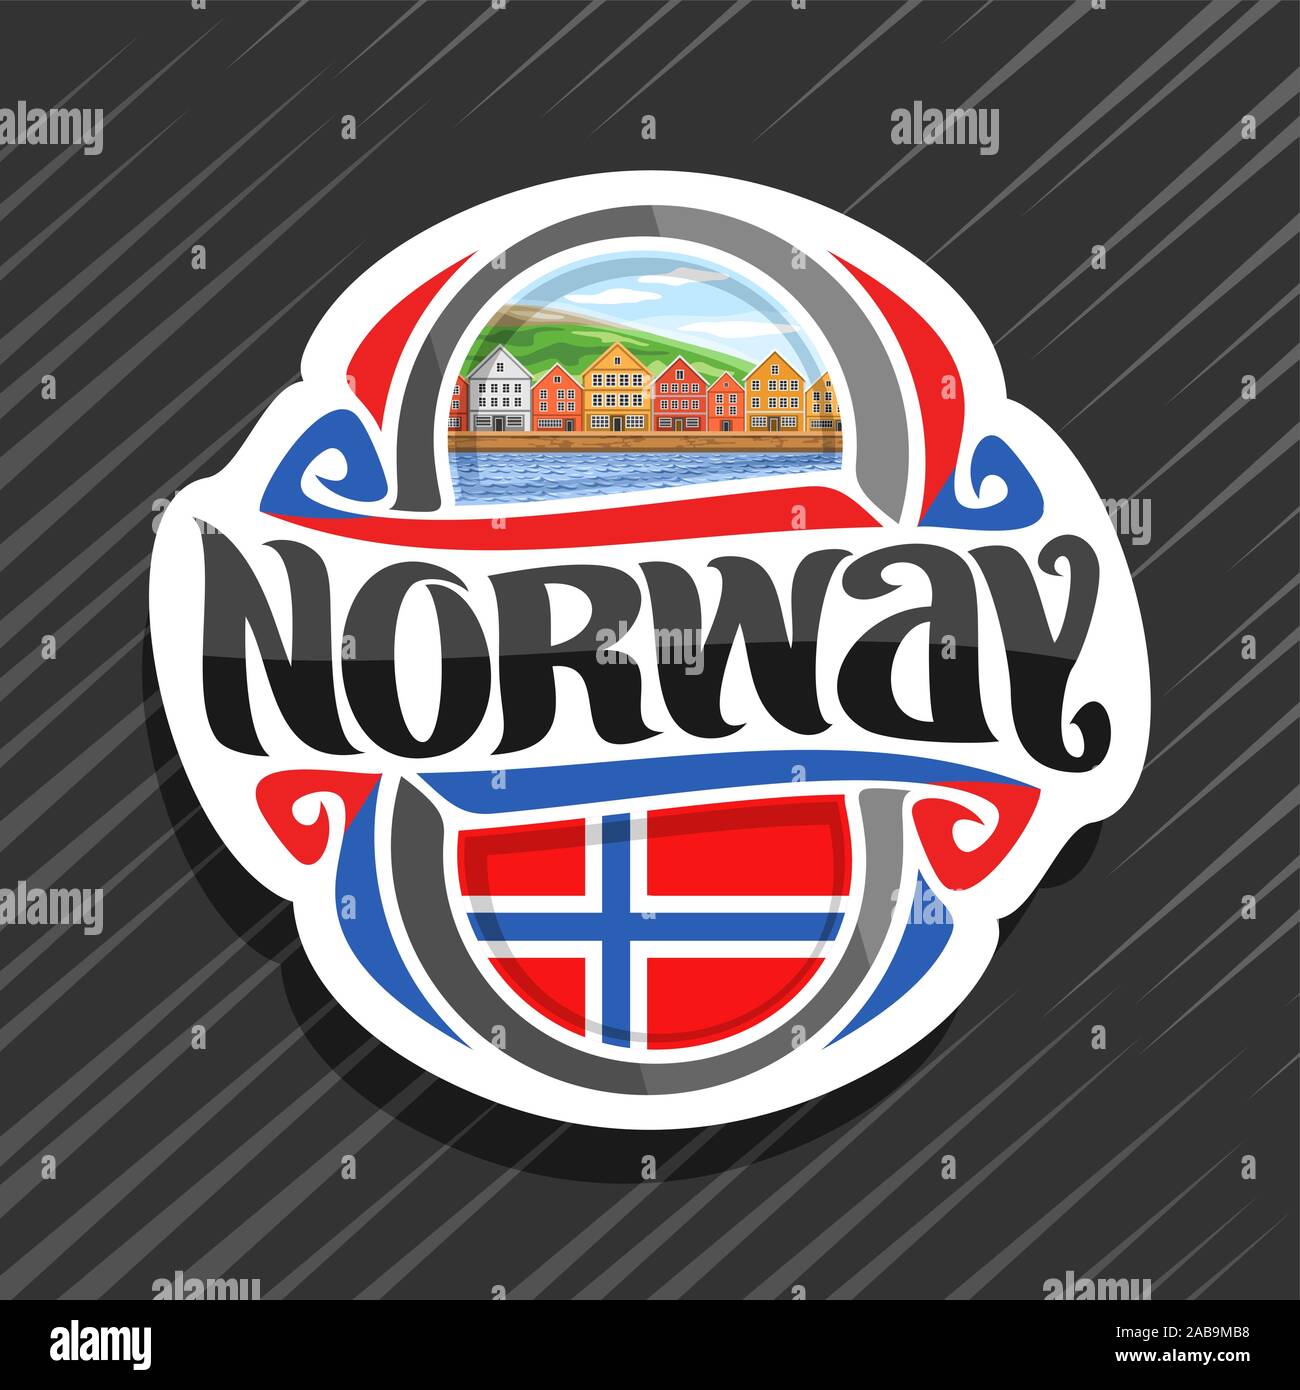 Vector logo for Norway country, fridge magnet with norwegian flag, original brush typeface for word norway and norwegian national symbol - old houses Stock Vector